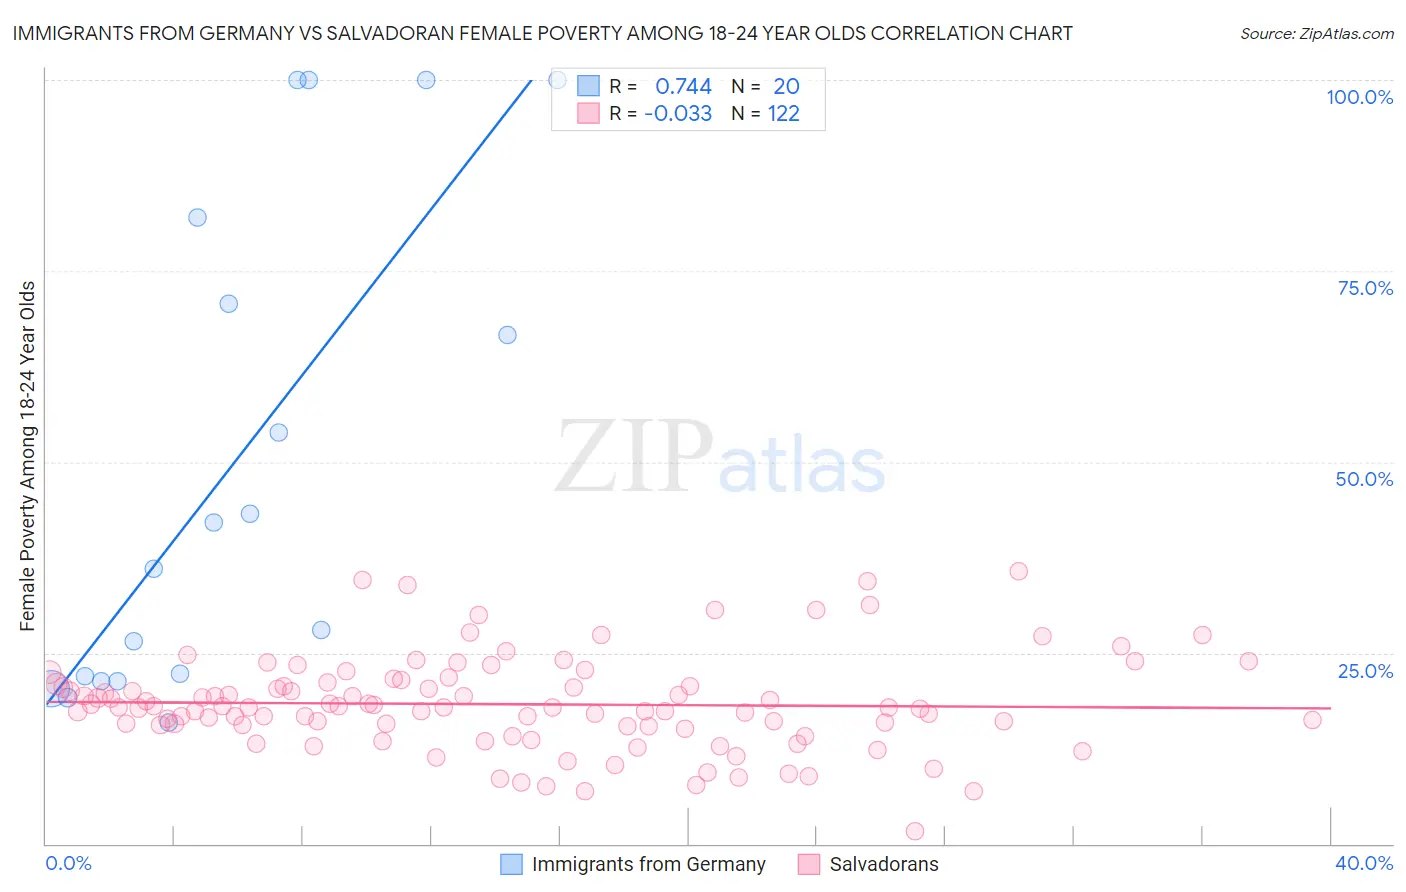 Immigrants from Germany vs Salvadoran Female Poverty Among 18-24 Year Olds